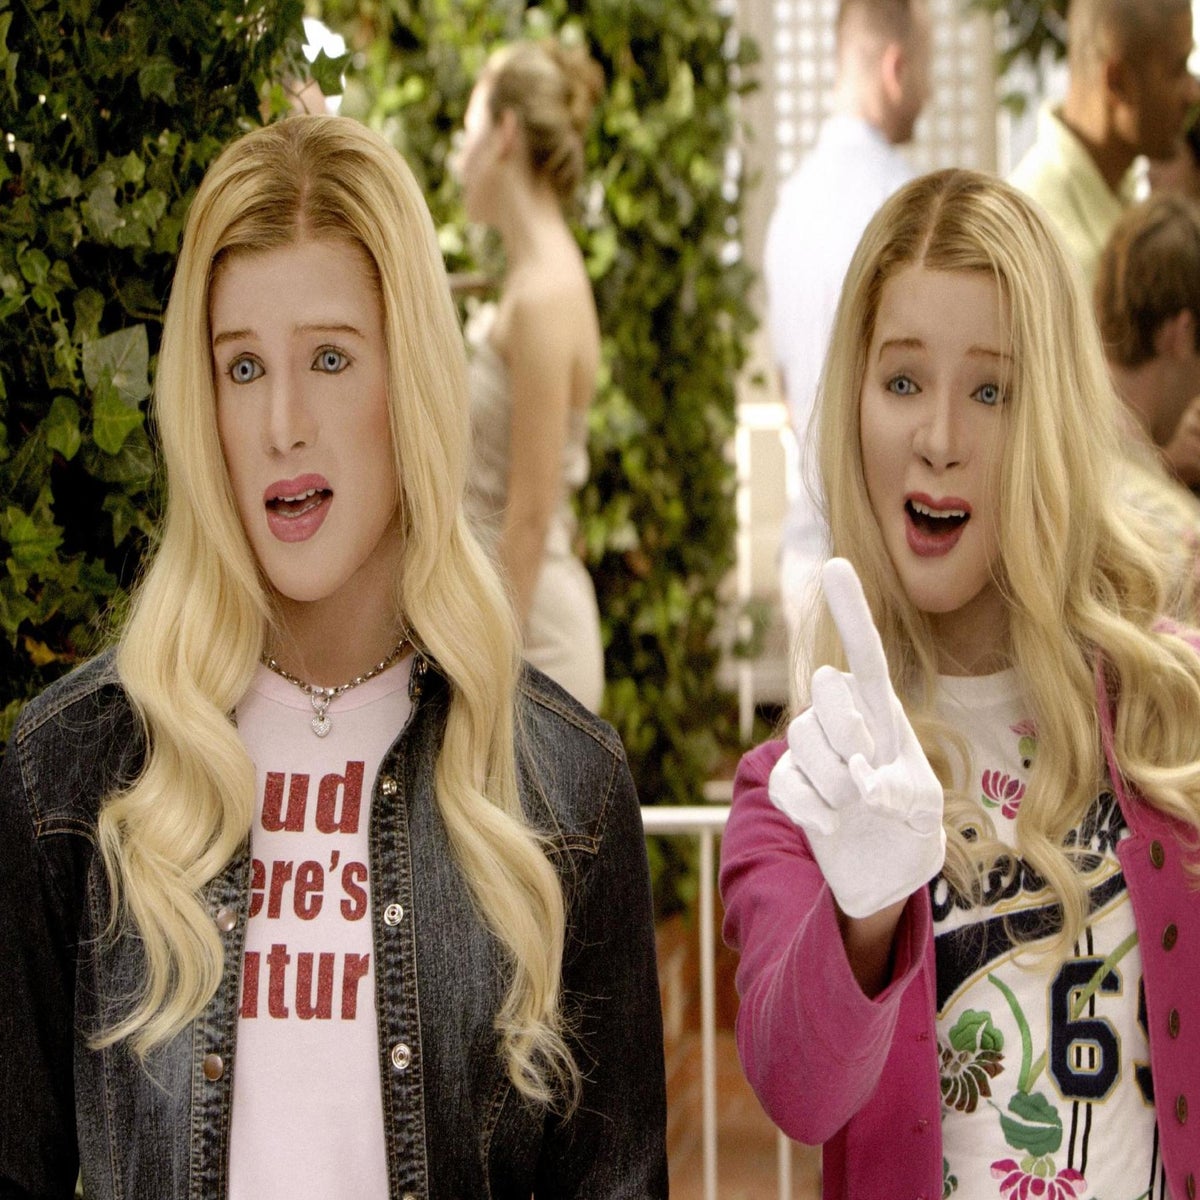 White Chicks 2: Terry Crews announces sequel to 2004 comedy with Shawn and  Marlon Wayans, The Independent